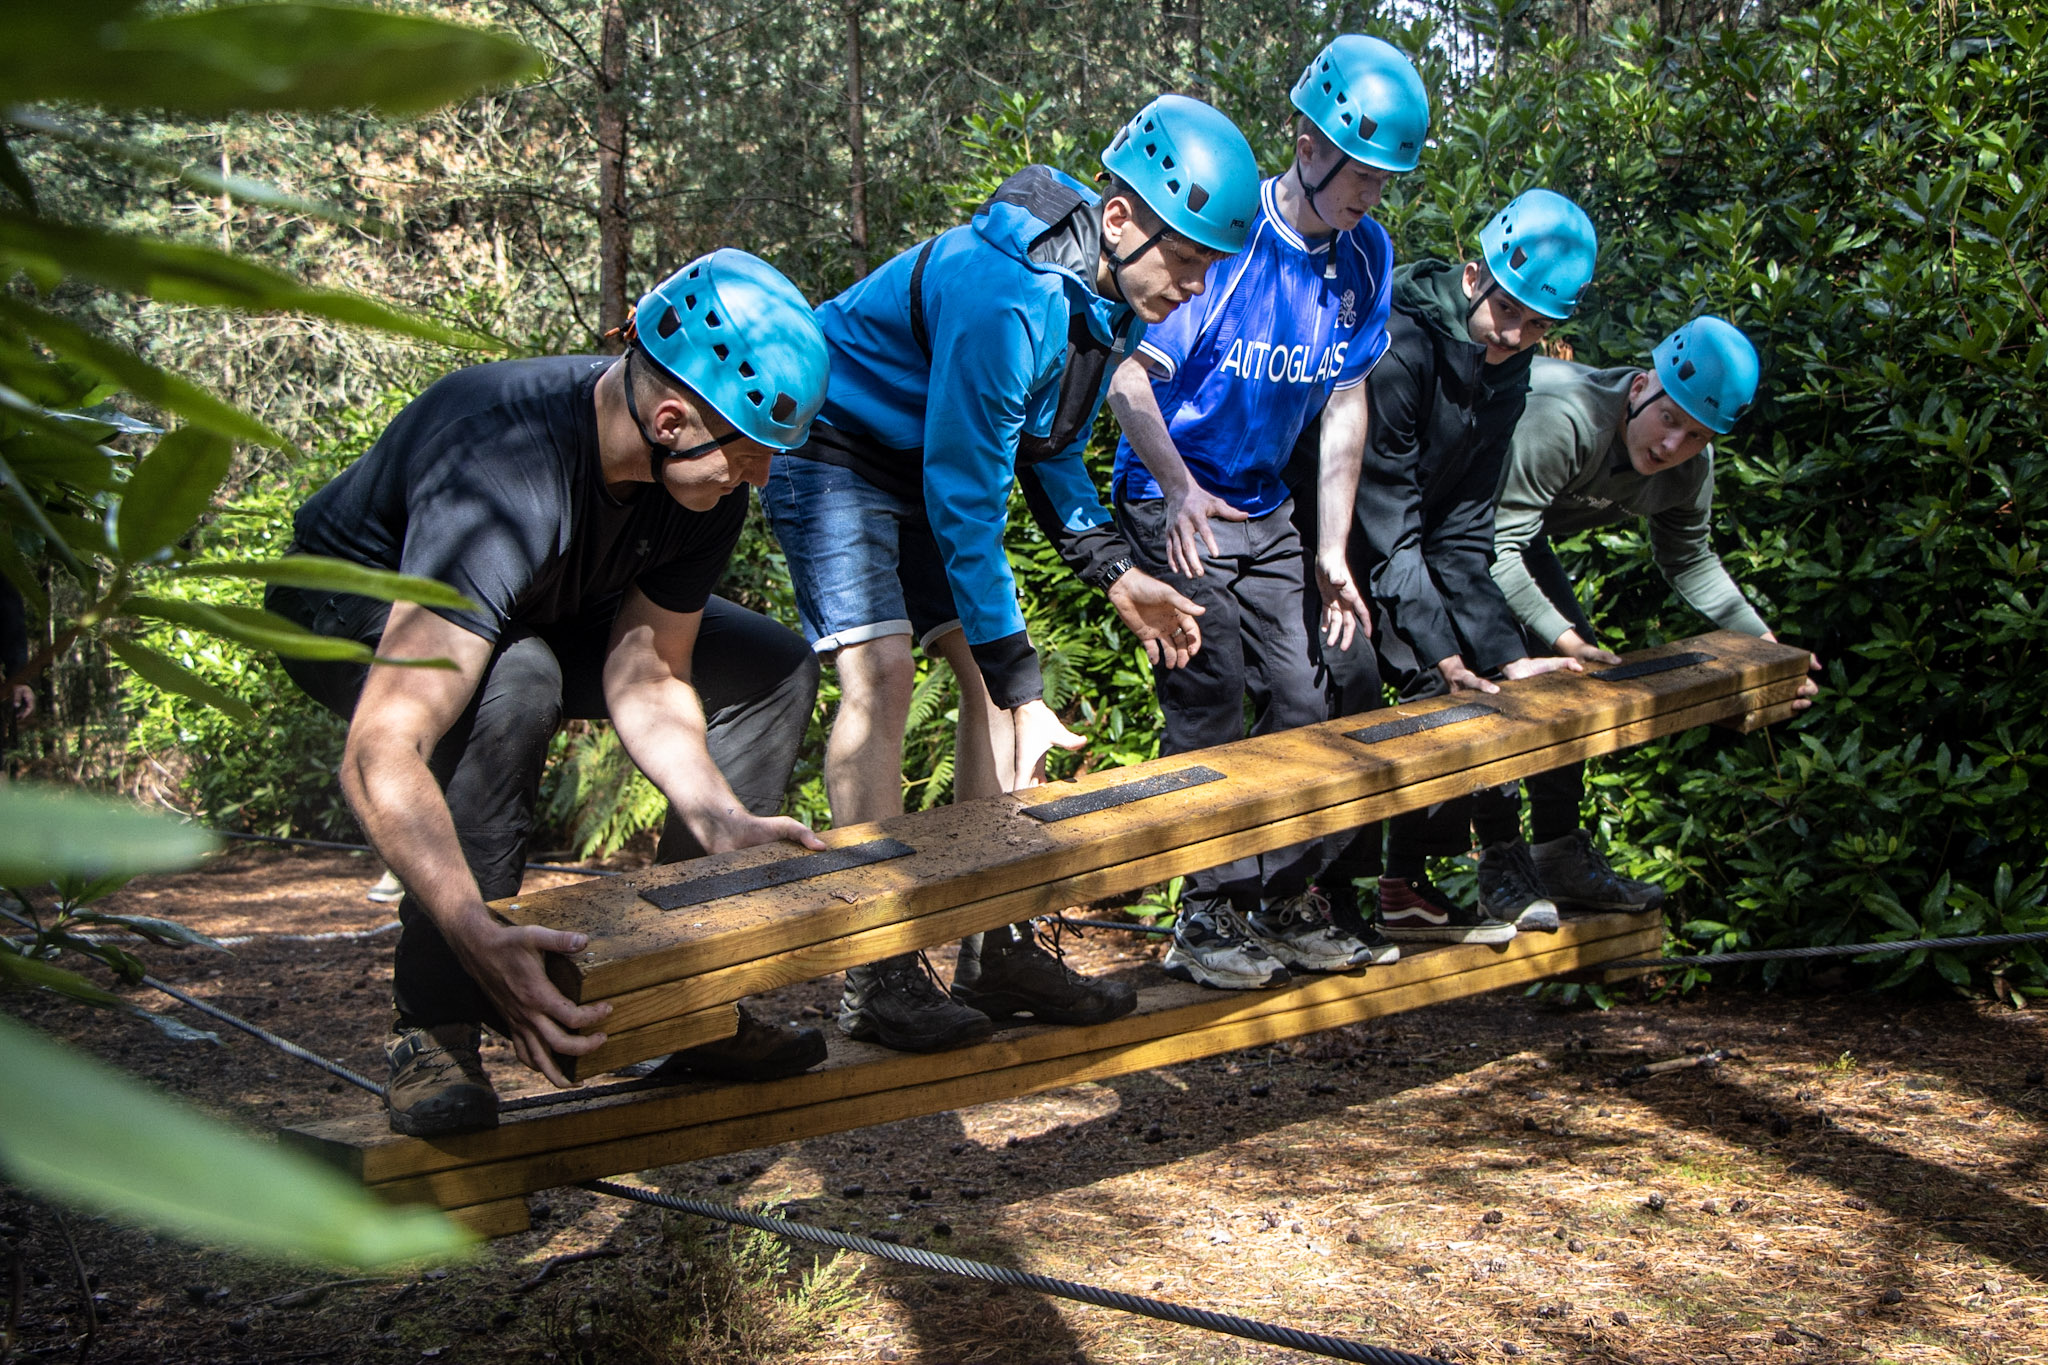 A wgroup of male business owners on the Low Ropes activity at New Forest Activities as part of a Circuir Breaker Day